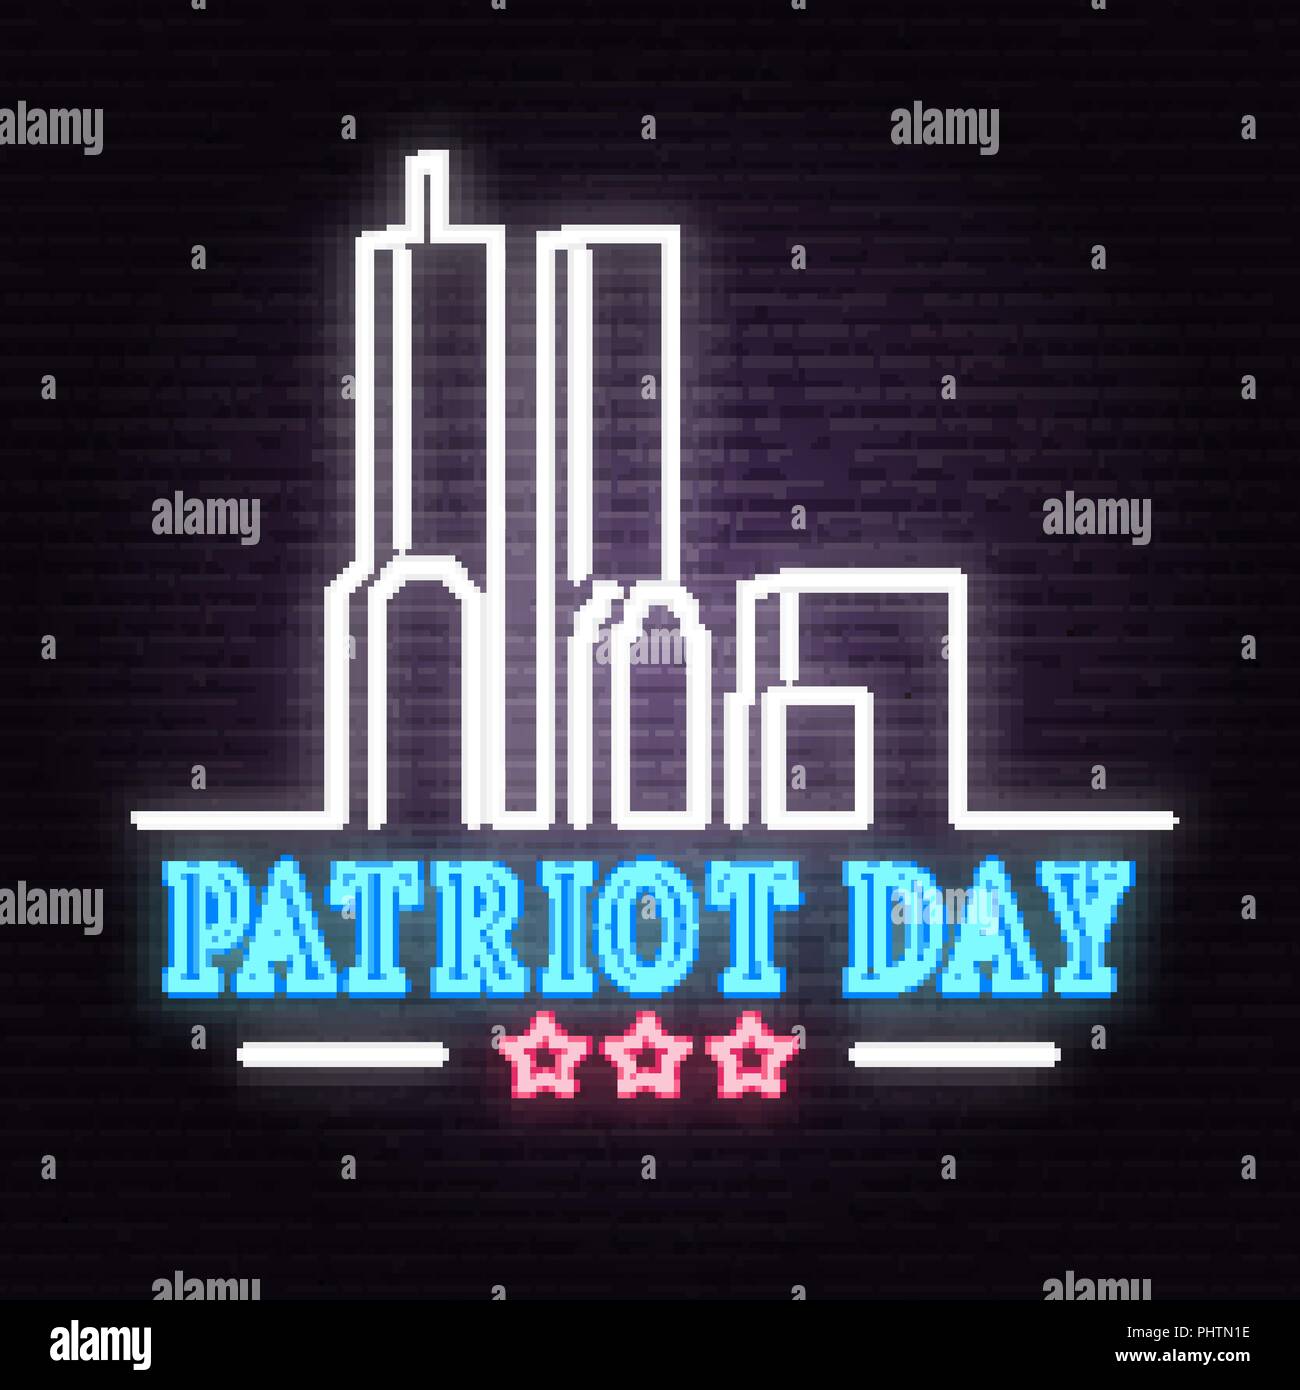 Patriot Day neon sign. We will never forget september 11, 2001. Patriotic banner or poster. Vector illustration for Patriot Day. Stock Vector